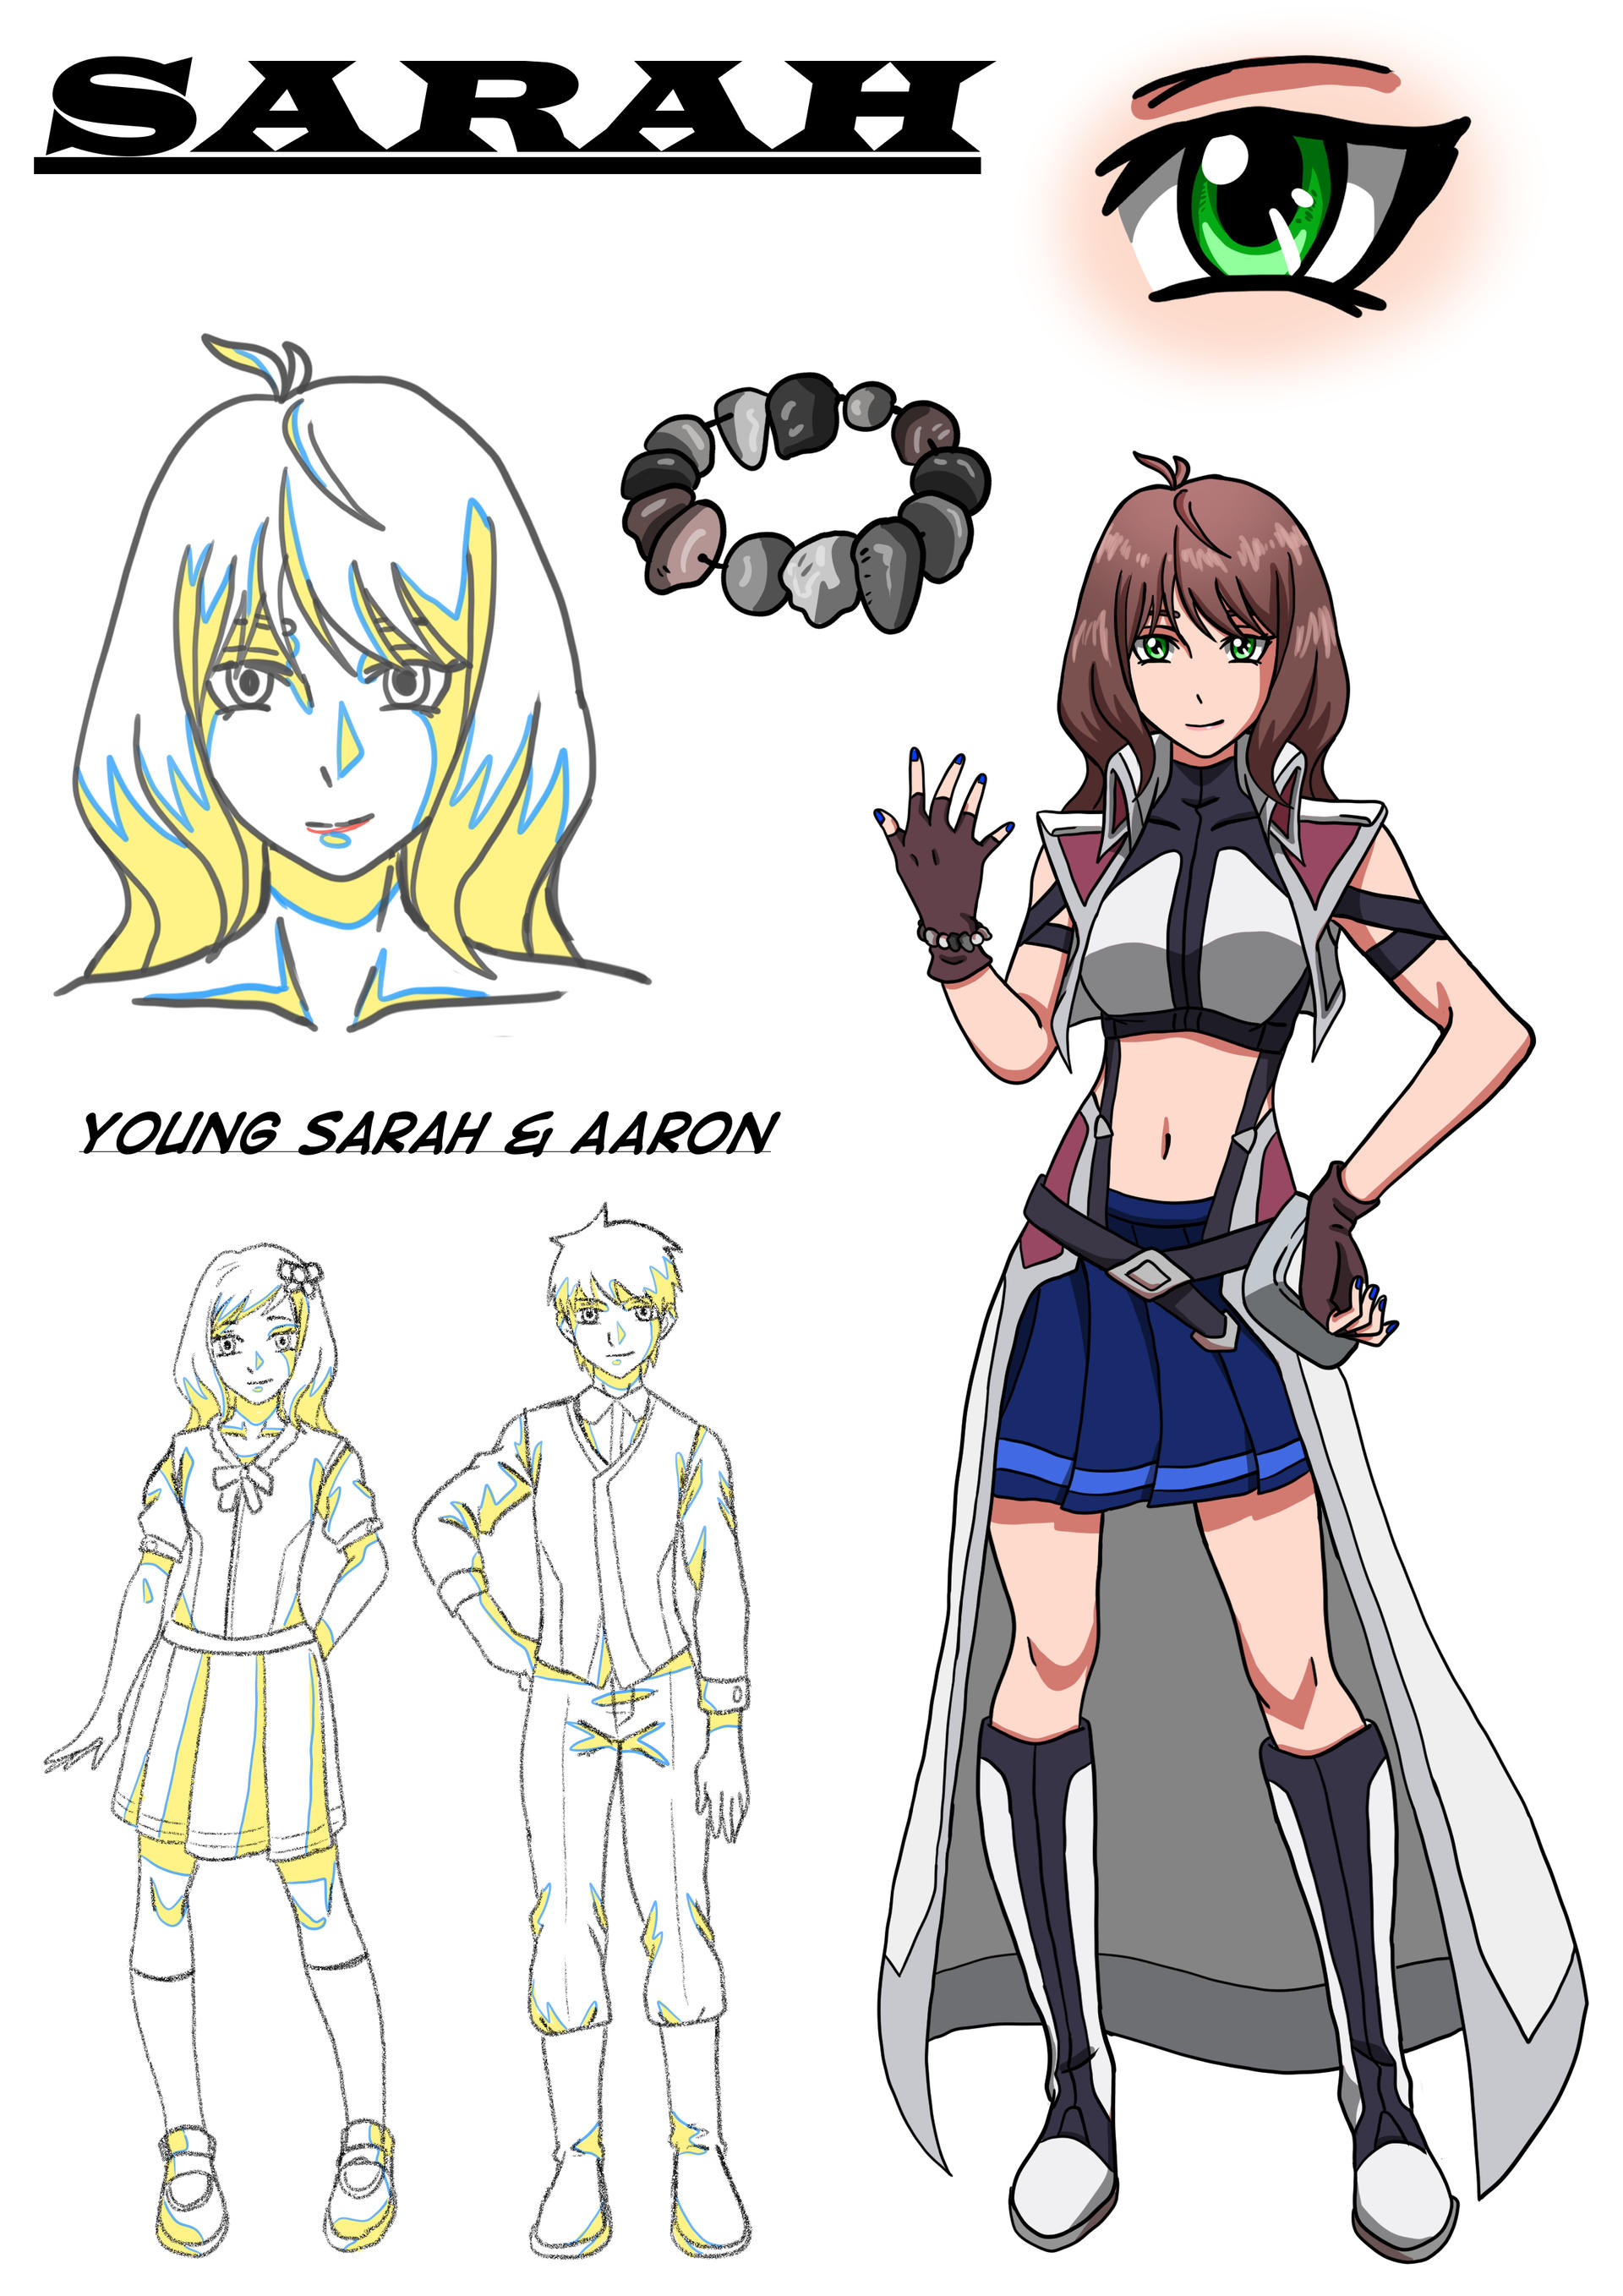 CROSS ANGE: THE GLITCH IN THE SYSTEM. Scarlett. by Raggylad98 on